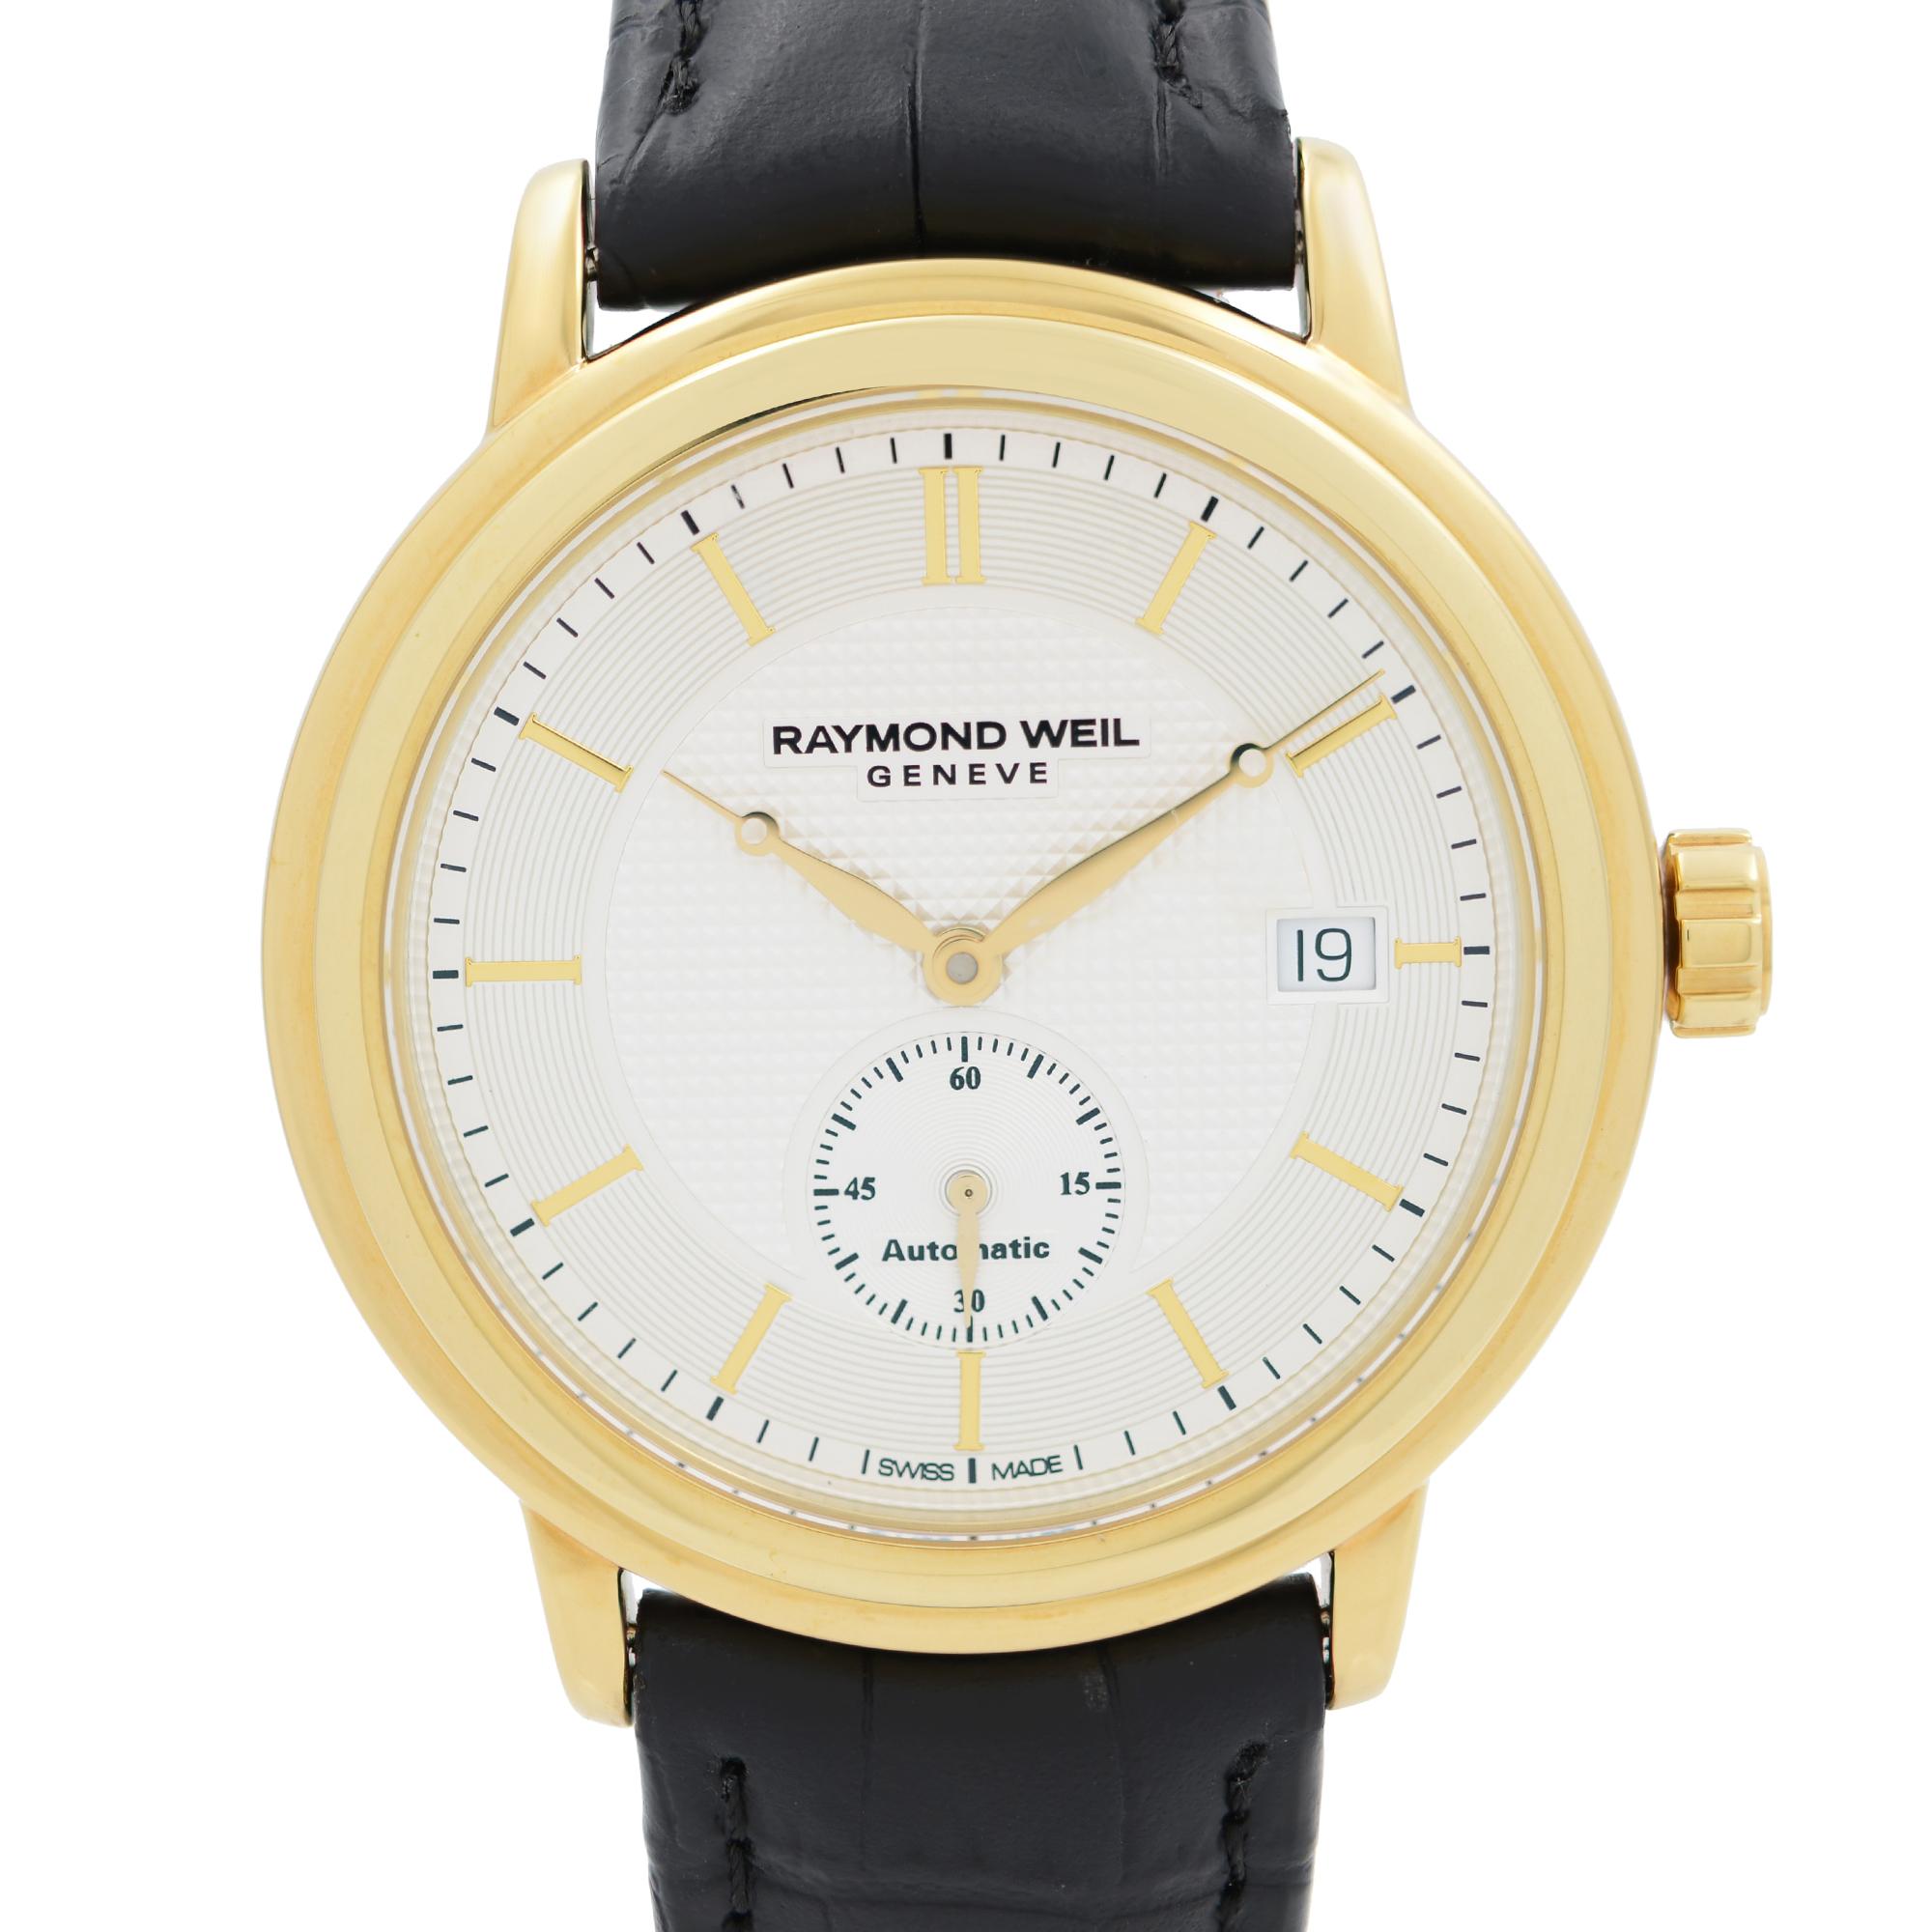 Store Display Model Can have minor blemishes During Store Display and handling.  Raymond Weil Maestro PVD Gold Steel Silver Dial Men's Watch RW-2838-PC-65001. This Beautiful Timepiece Features: Yellow Gold PVD Stainless Steel Case with a Black